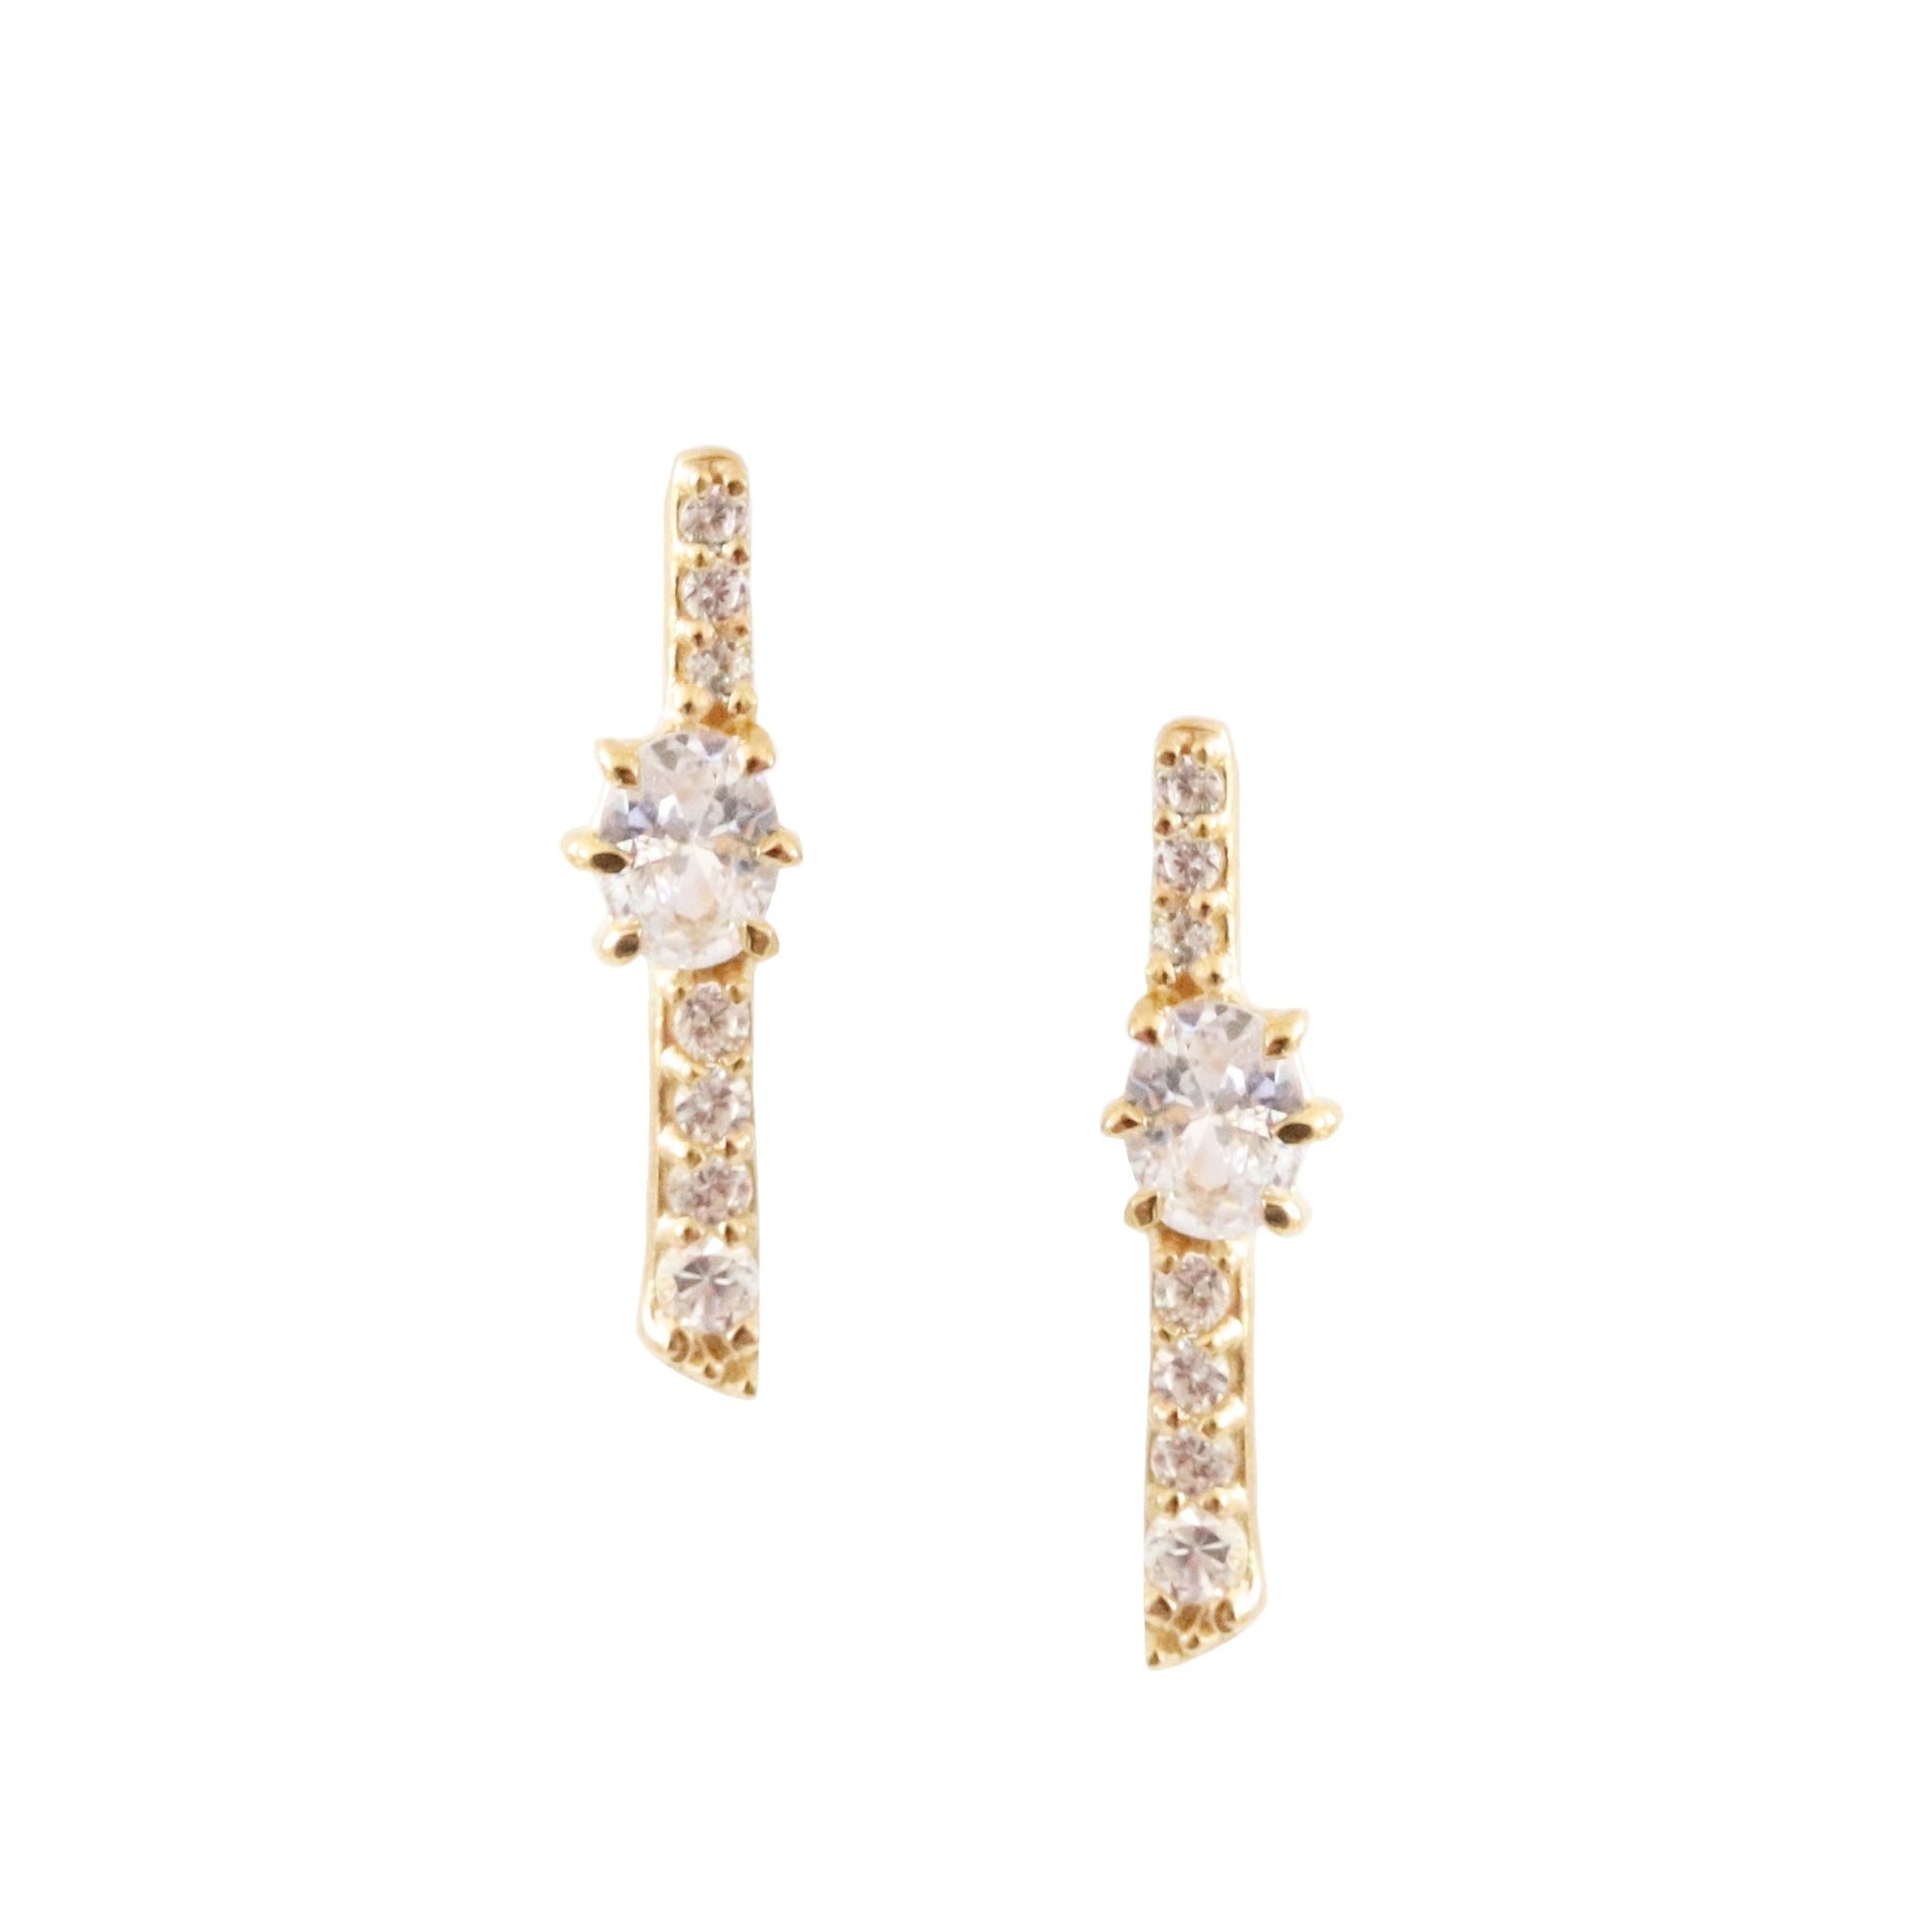 DAINTY KIND OVAL BAR STUDS - CUBIC ZIRCONIA & GOLD - SO PRETTY CARA COTTER